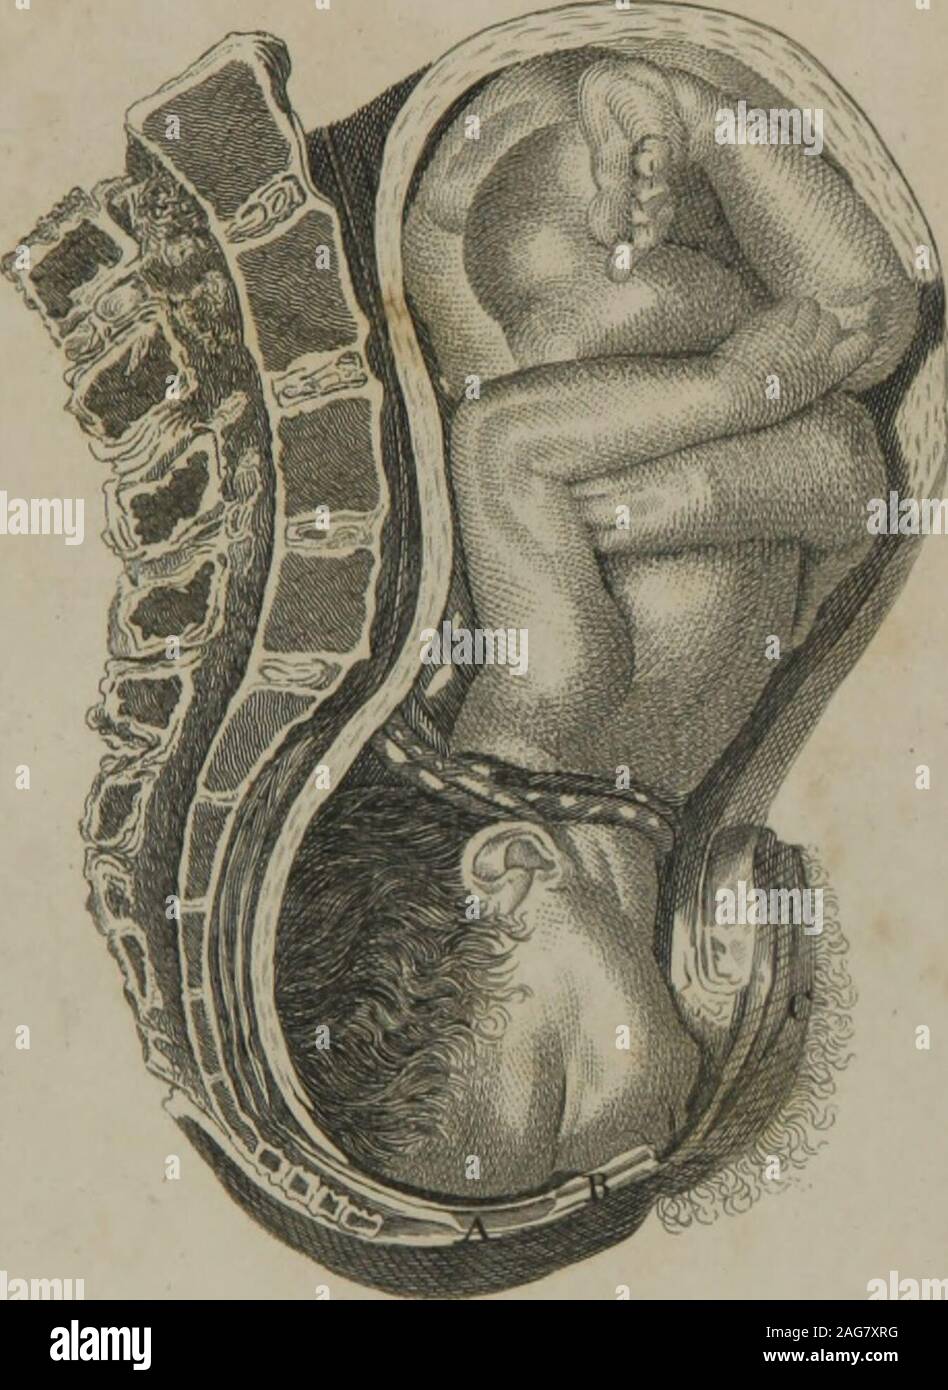 . An introduction to the practice of midwifery. BEING BELOW THE PUBES, AND THEVERTEX IN THE CONCAVITY OF THE OS SACRUM ; THE WA-TERS LIKEWISE BEING ALL DISCHARGED, THE UTERUSAPPEARS CLOSELY JOINED TO THE BODY OF THE CHILD,ROUND THE NECK OF WHICH IS ONE CIRCUMVOLUTION OFTHE FUNIS. A The inferior part of the rectum. B The perinaeum. C The left labium pudendi. When the pelvis is large, the head, if small, will come alongin this position, and the child be saved ; for, as the head ad-vances lower, the face and forehead will stretch the partsbetween the frsenum labiorum and coccyx, in form of a larg Stock Photo